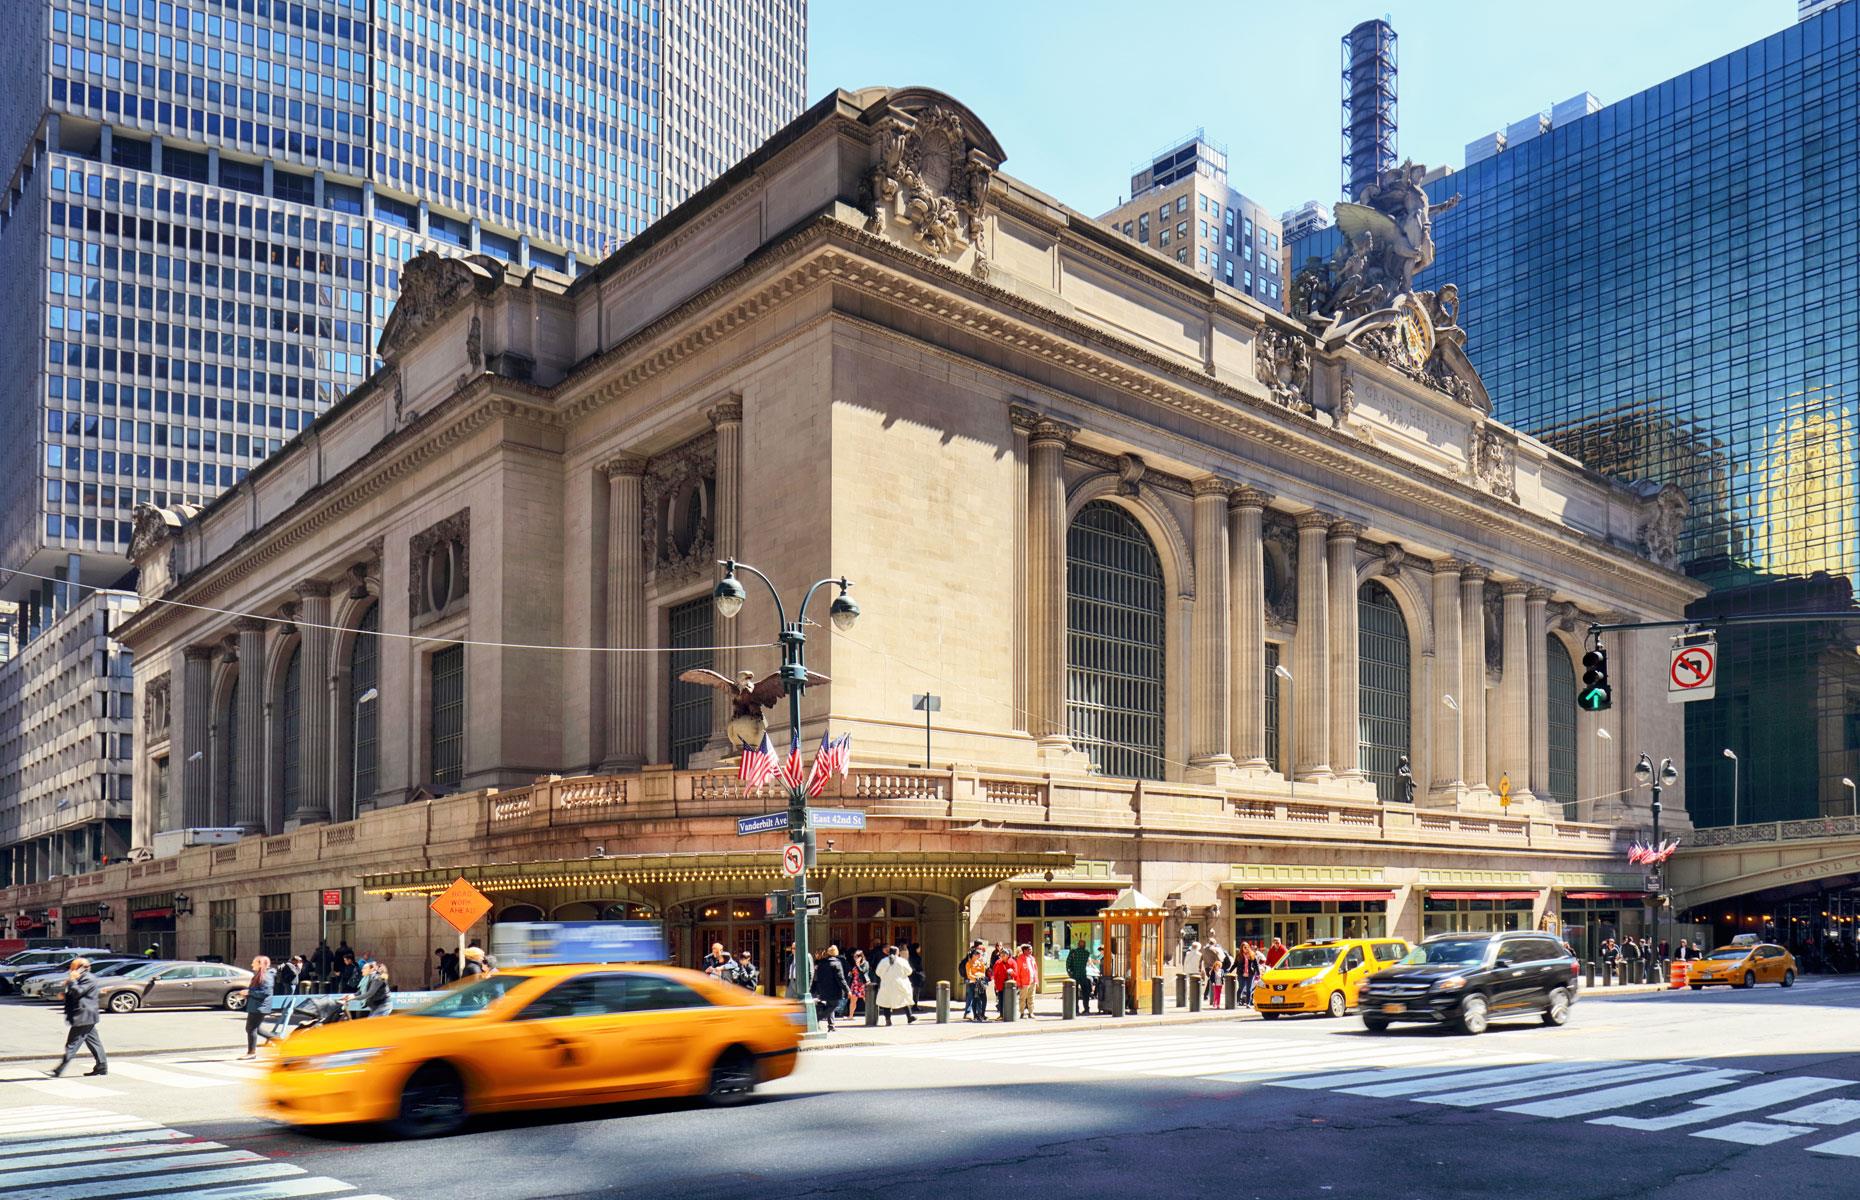 A number of architectural firms vied to conceive New York's Grand Central Terminal in 1903, and the contract to design the station was awarded to two firms, Reed & Stem and Warren & Wetmore.